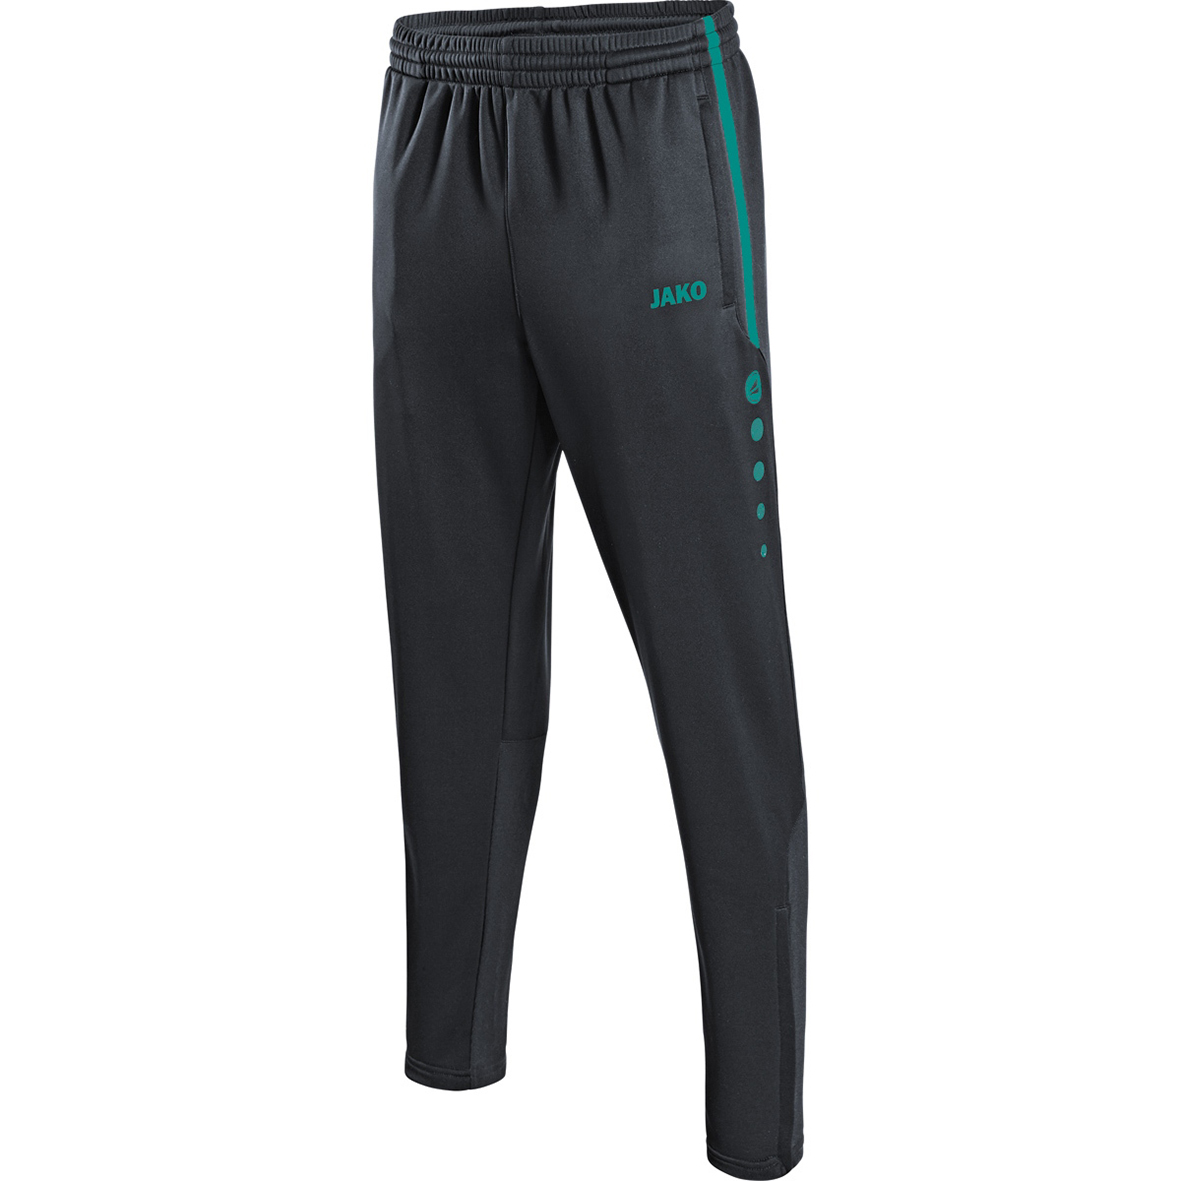 JAKO TRAINING TROUSERS ACTIVE ANTHRACITE-TURQUOISE KIDS.